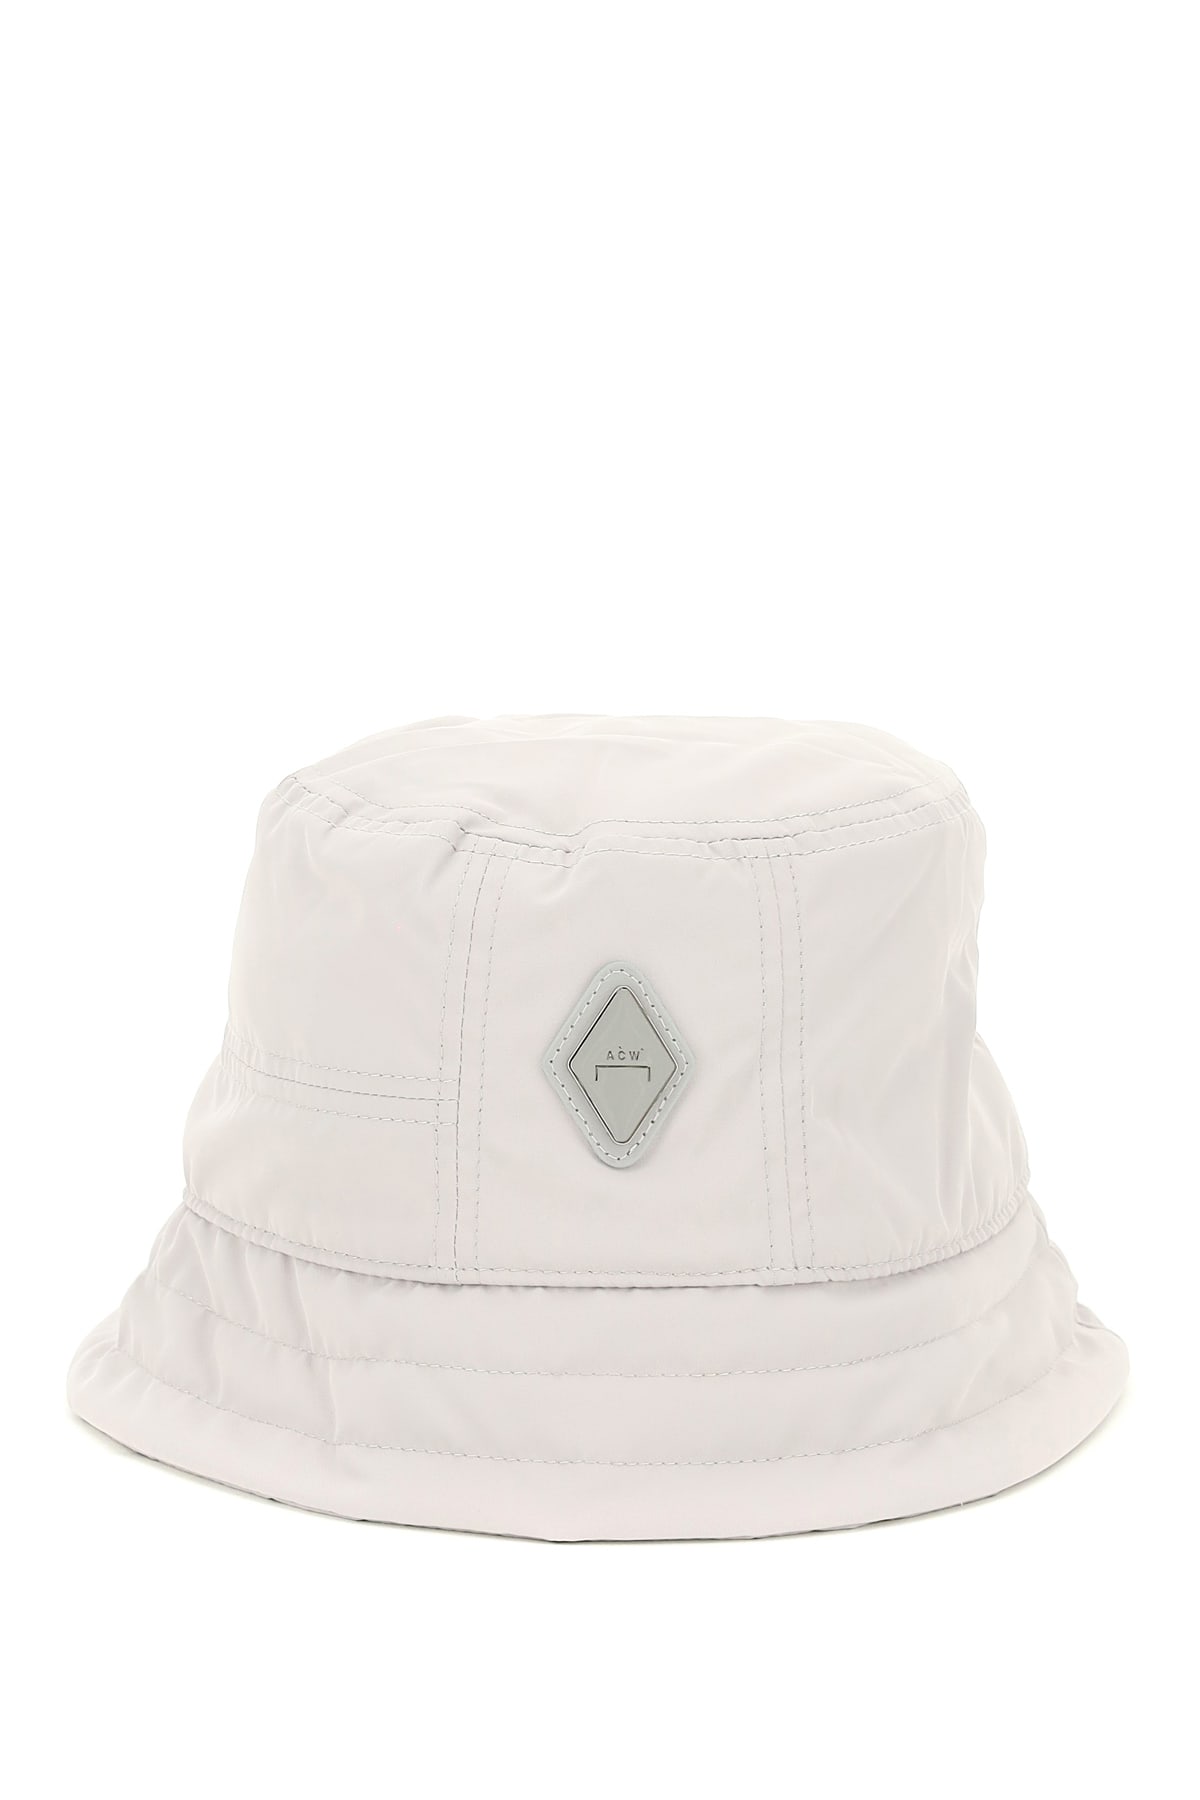 A-COLD-WALL Padded Bucket Hat